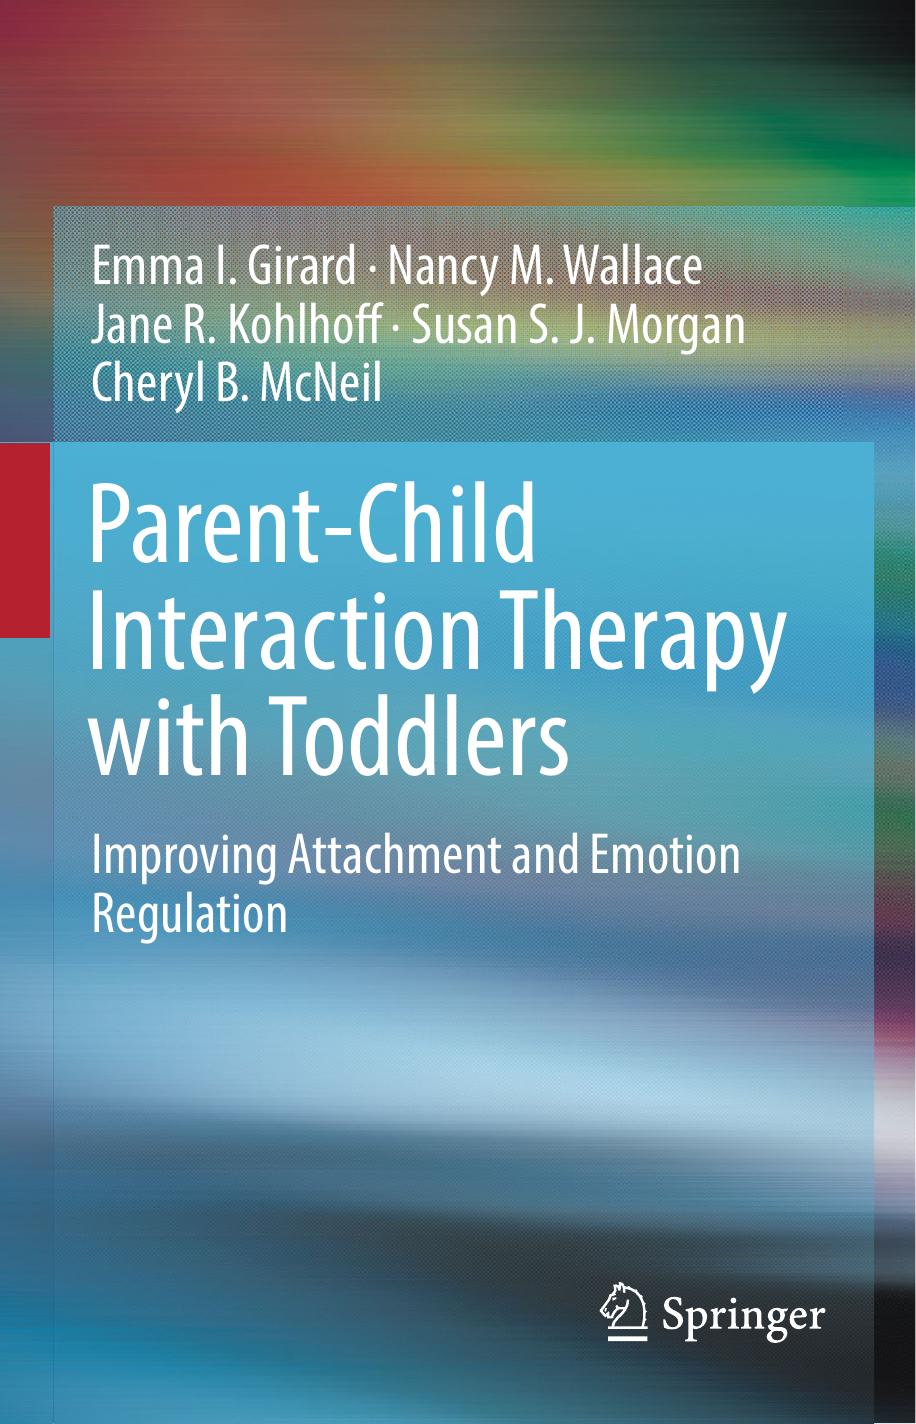 Parent-Child Interaction Therapy with Toddlers Improving Attachment and Emotion Regulation 2018